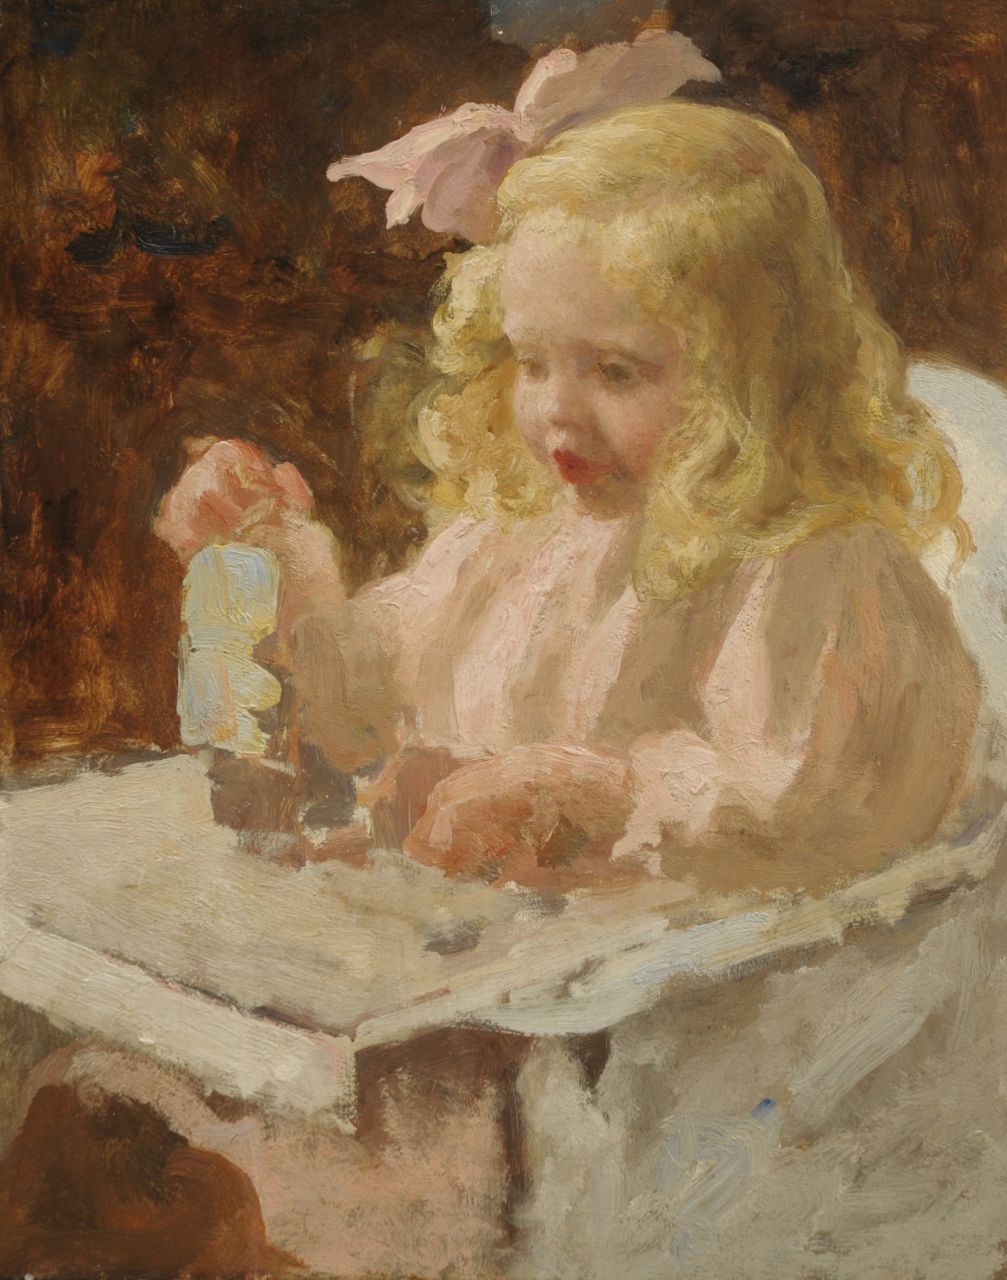 Pieters E.  | Evert Pieters, Maria Jacoba van Rijckevorsel at the age of 3, Öl auf Holz 39,8 x 31,8 cm, painted ca. 1913